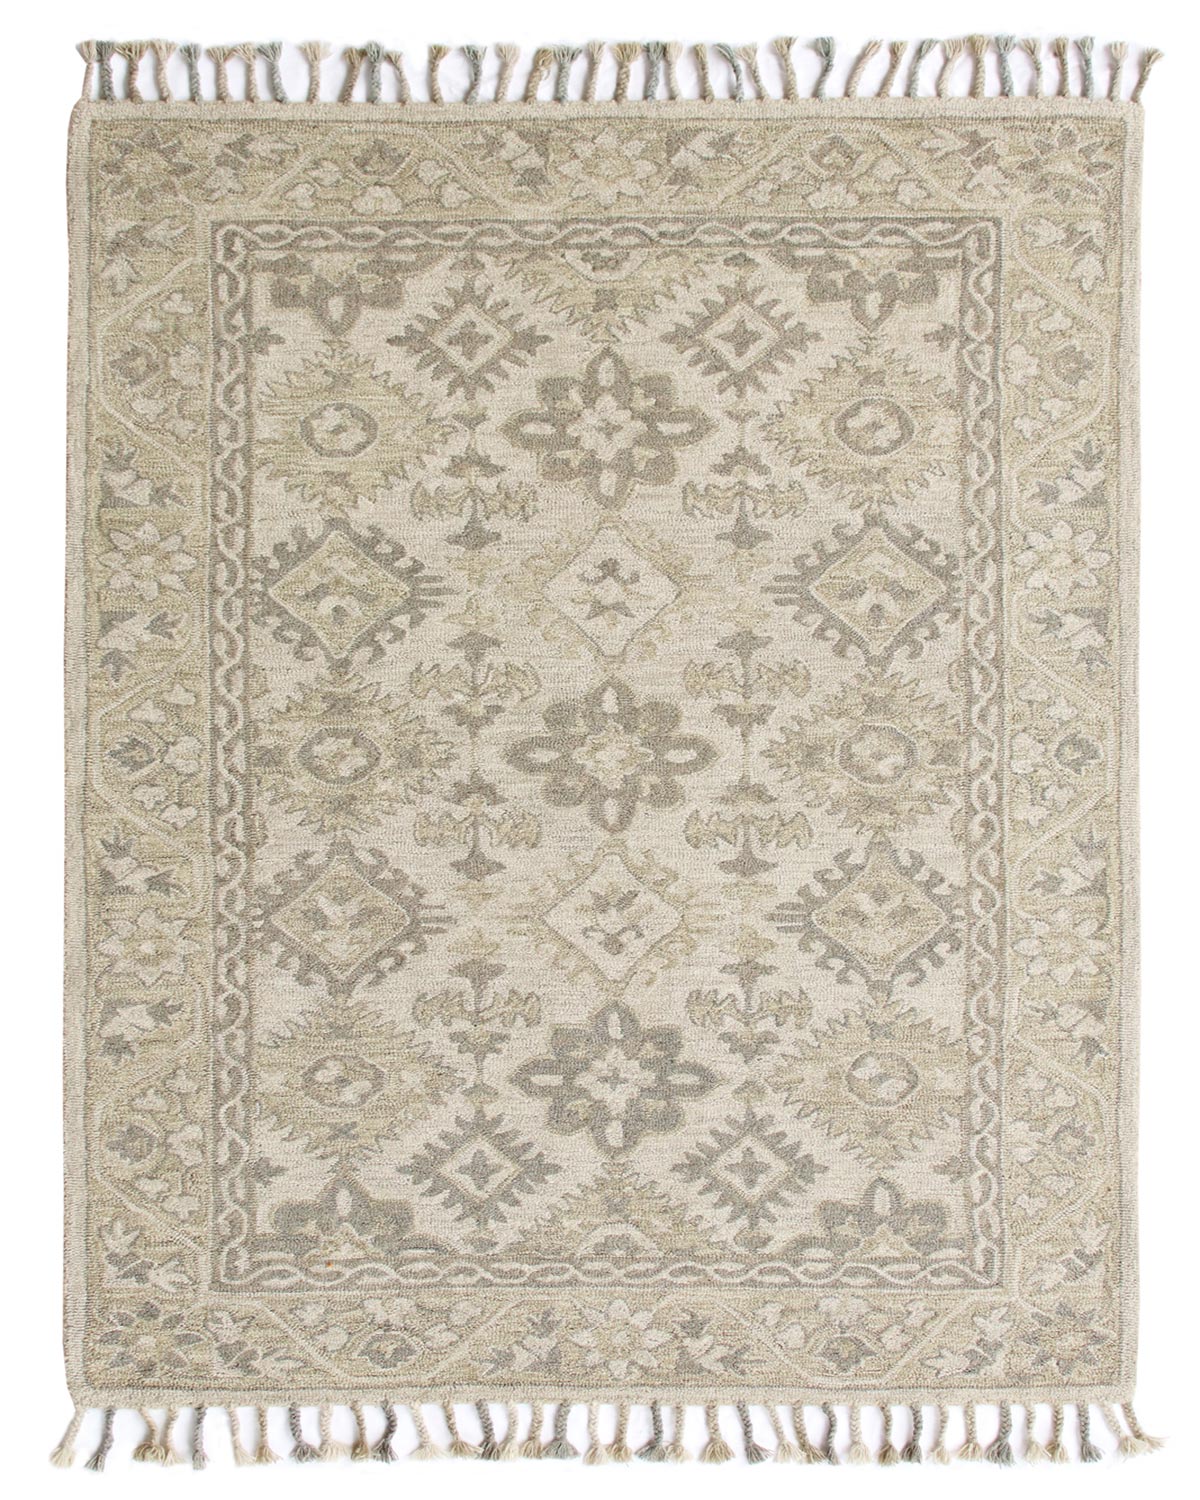 Hand-tufted Traditional Rug (INA-1020)